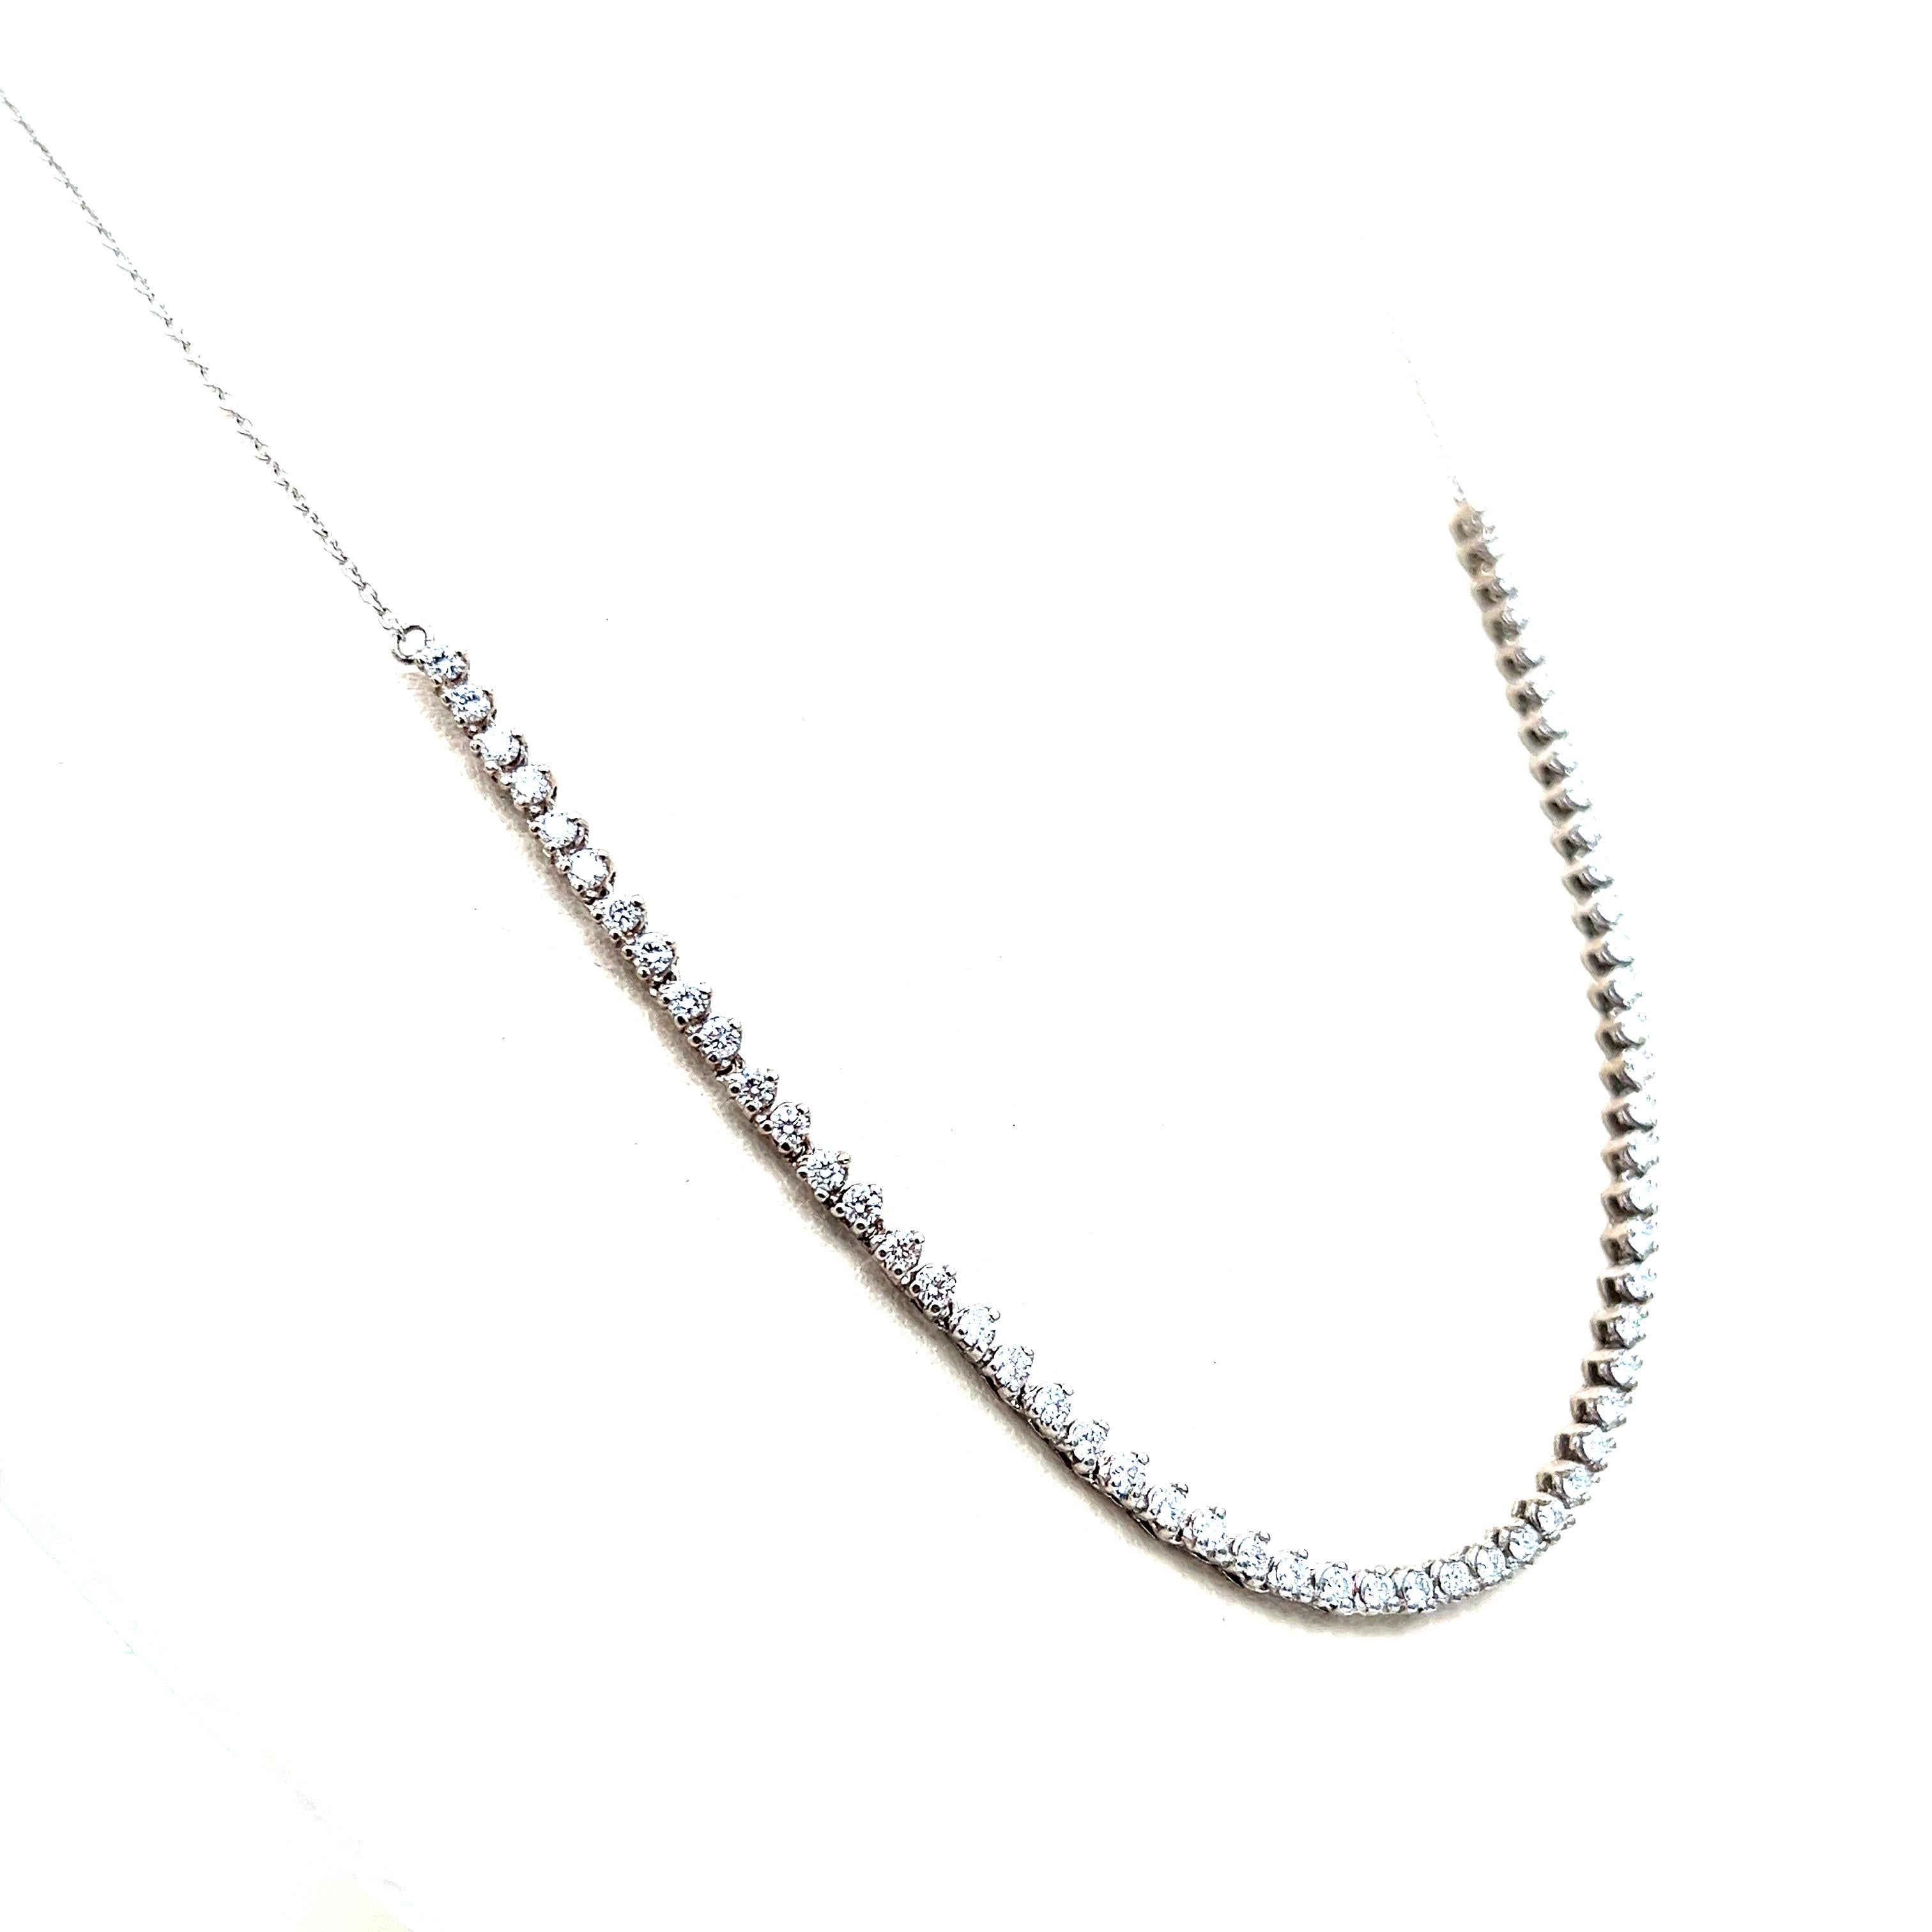 Beautiful tennis necklace with 3-prong set diamonds half-way! You can dress it up or wear it every day! This piece is set in 14k white gold and has 58 Round Brilliant Cut Diamonds weighing 1.69 ct and are graded F-G in color and VS2-SI1 in